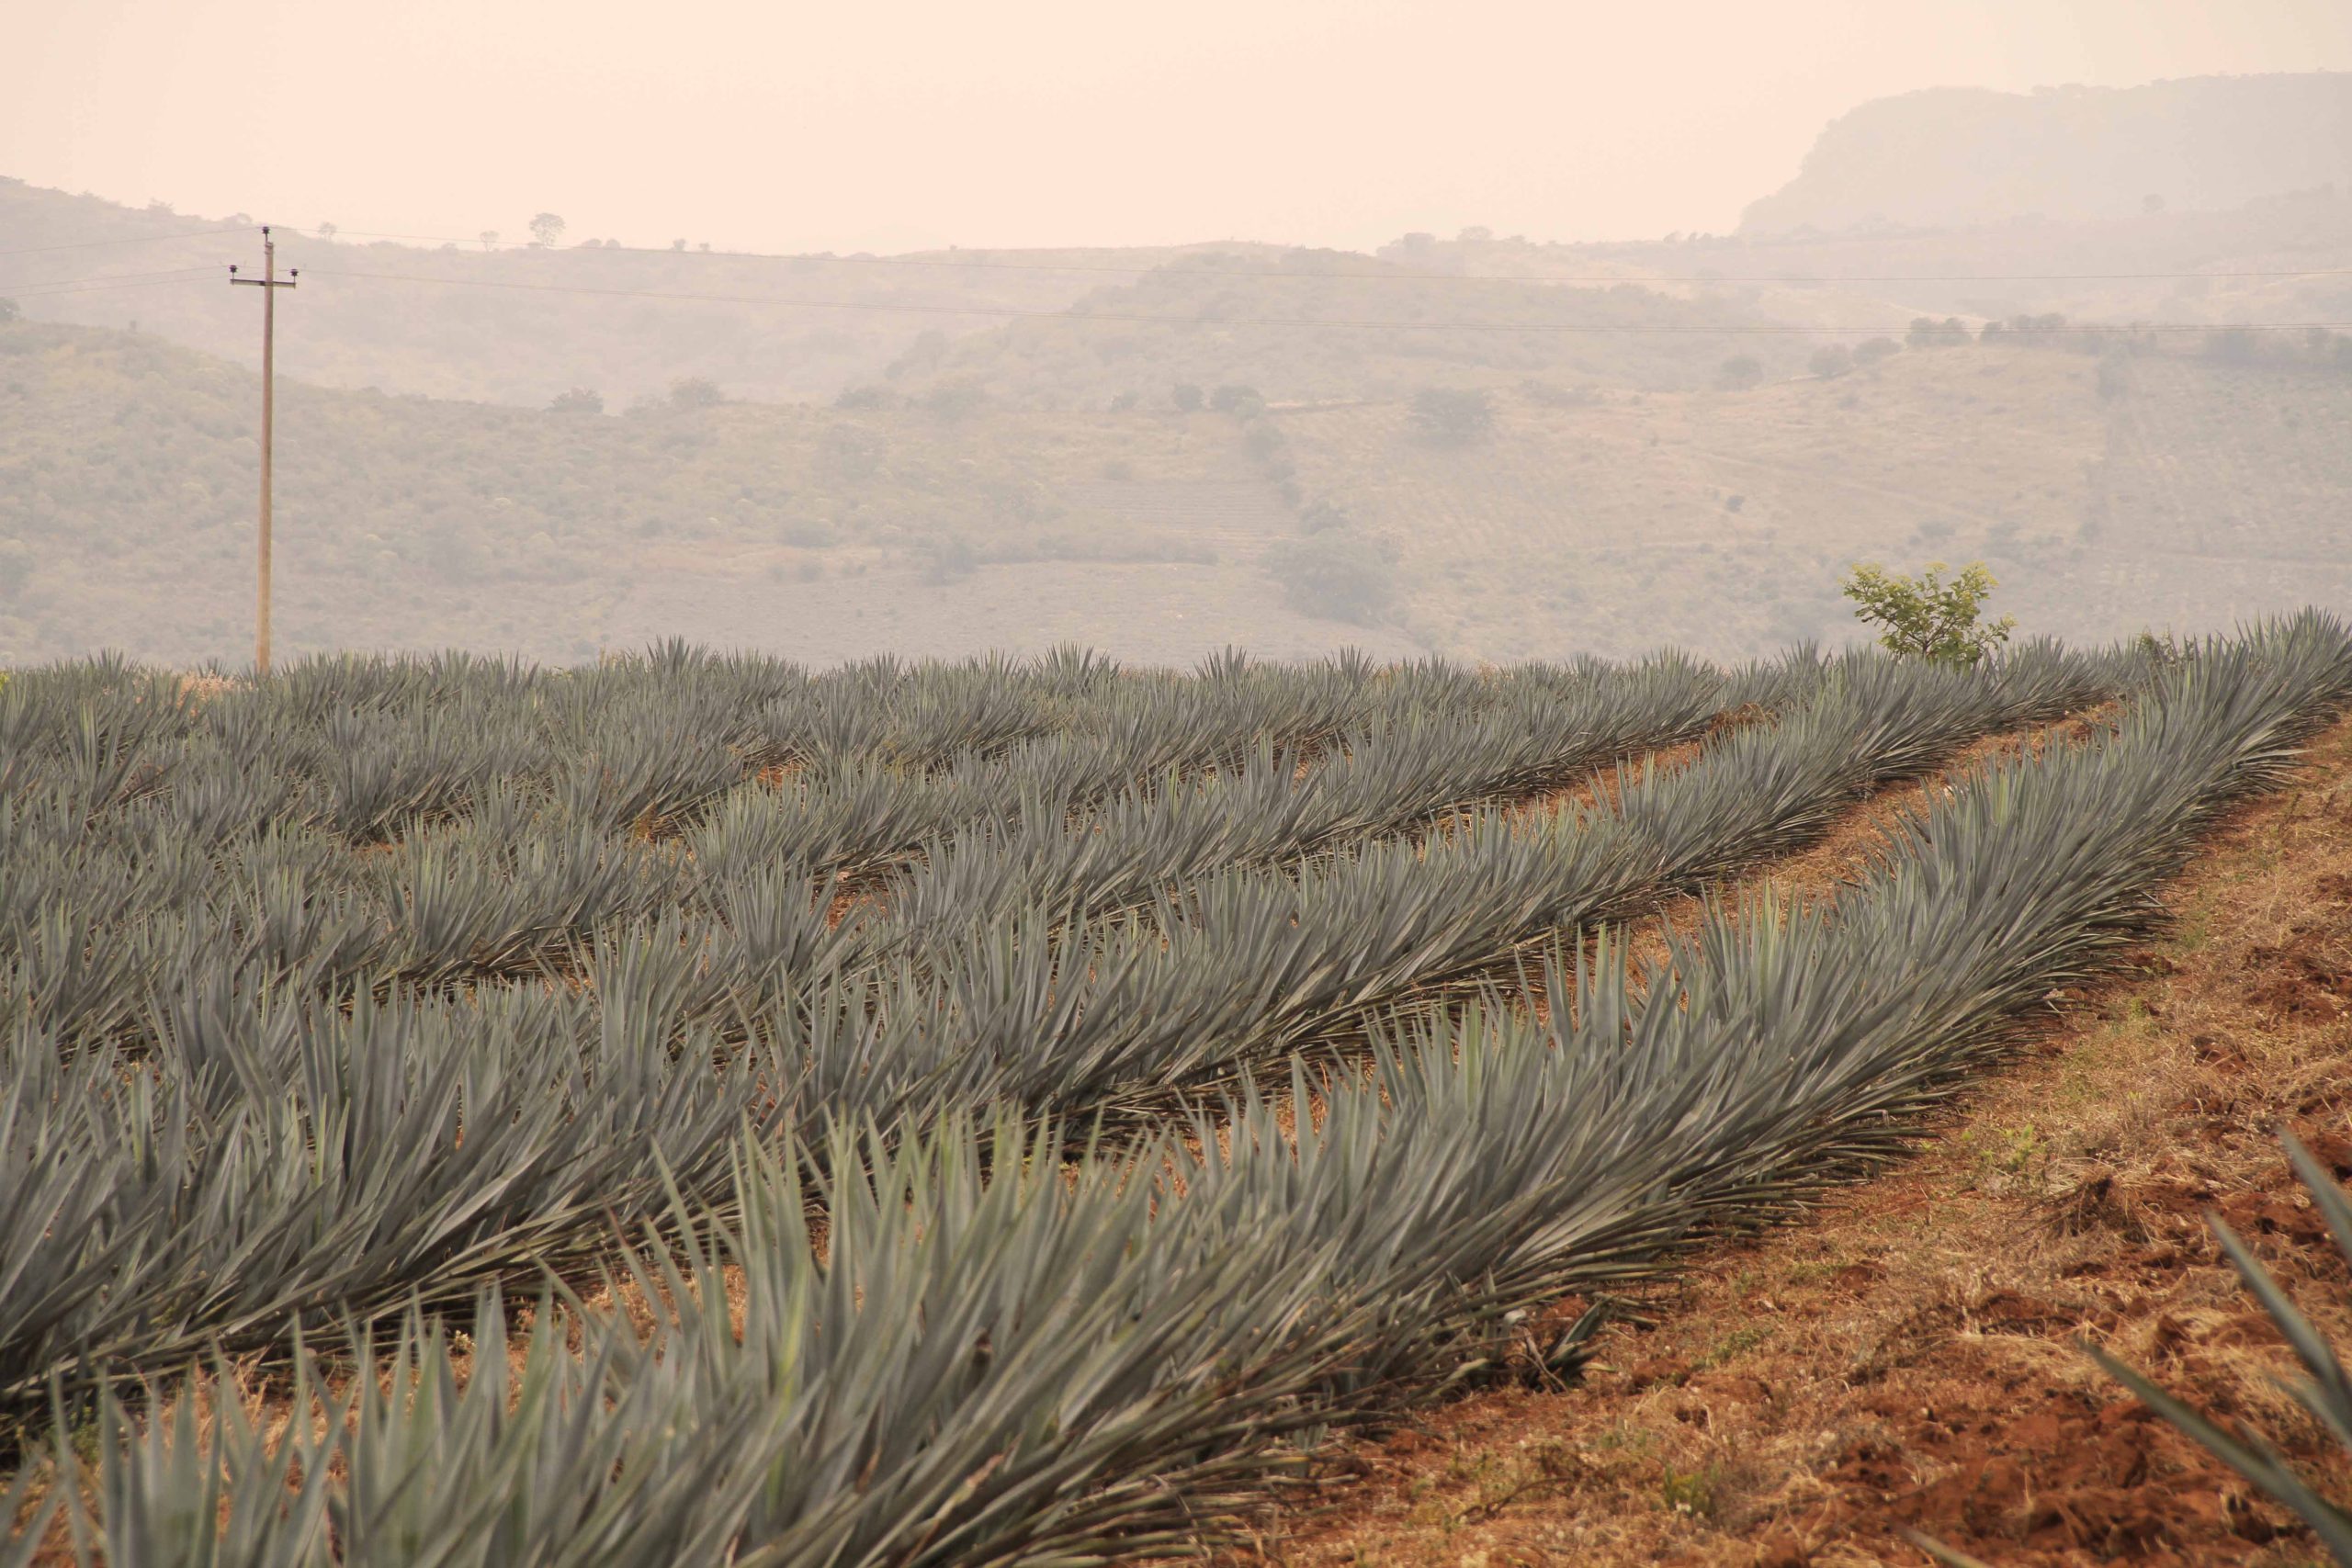 Agave plants can grow up to five feet tall after an eight to 12 year growing cycle. Photo courtesy of Clase Azul